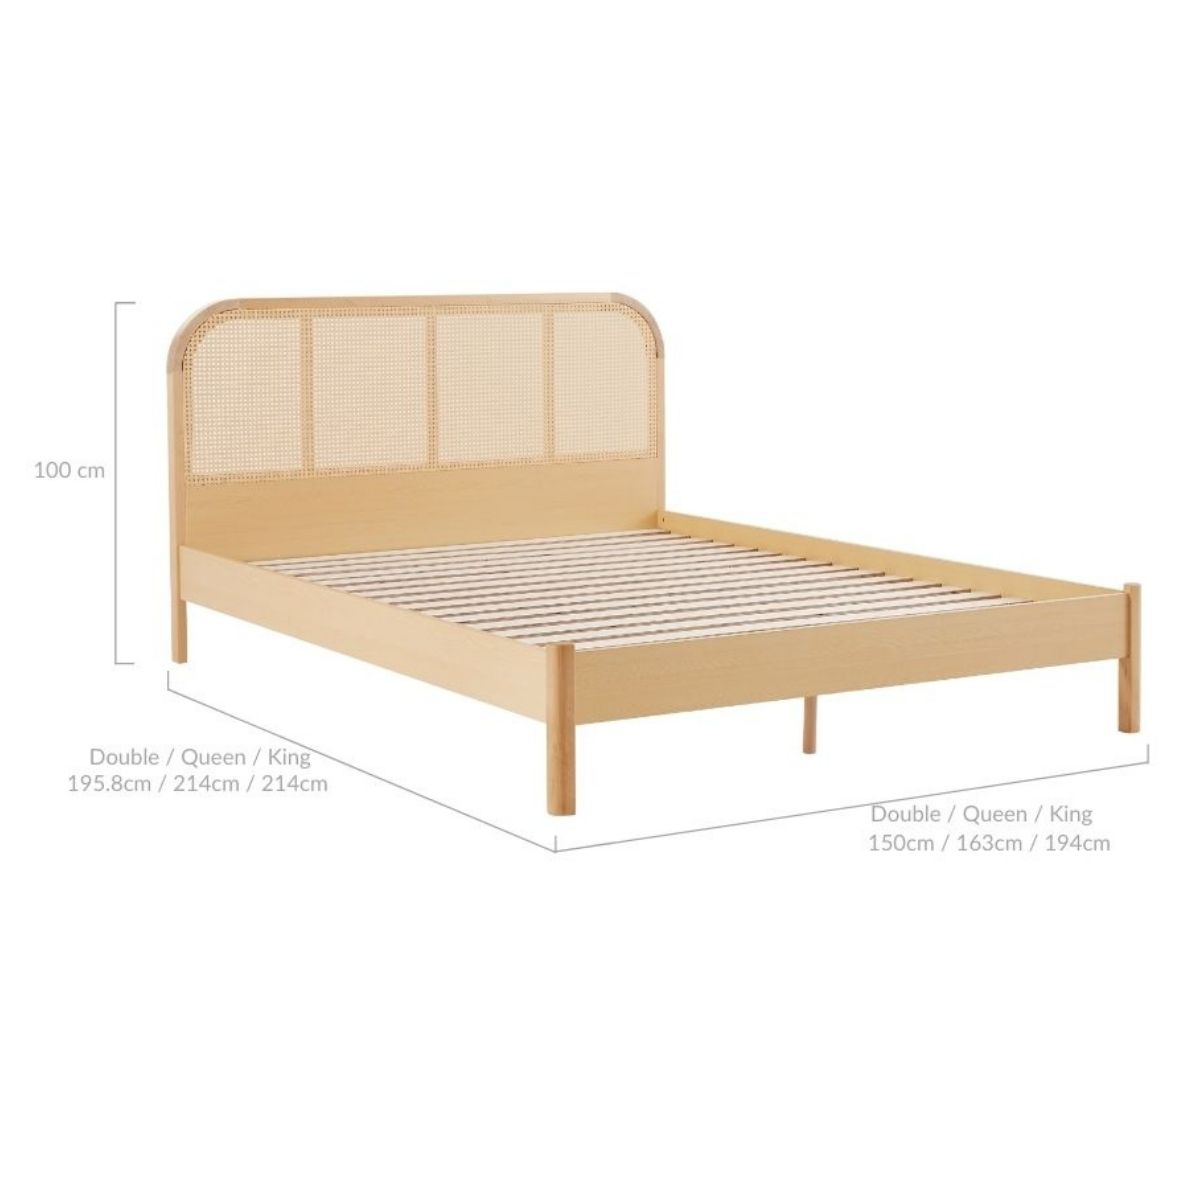 Lulu Bed Frame with Curved Rattan Bedhead - Double